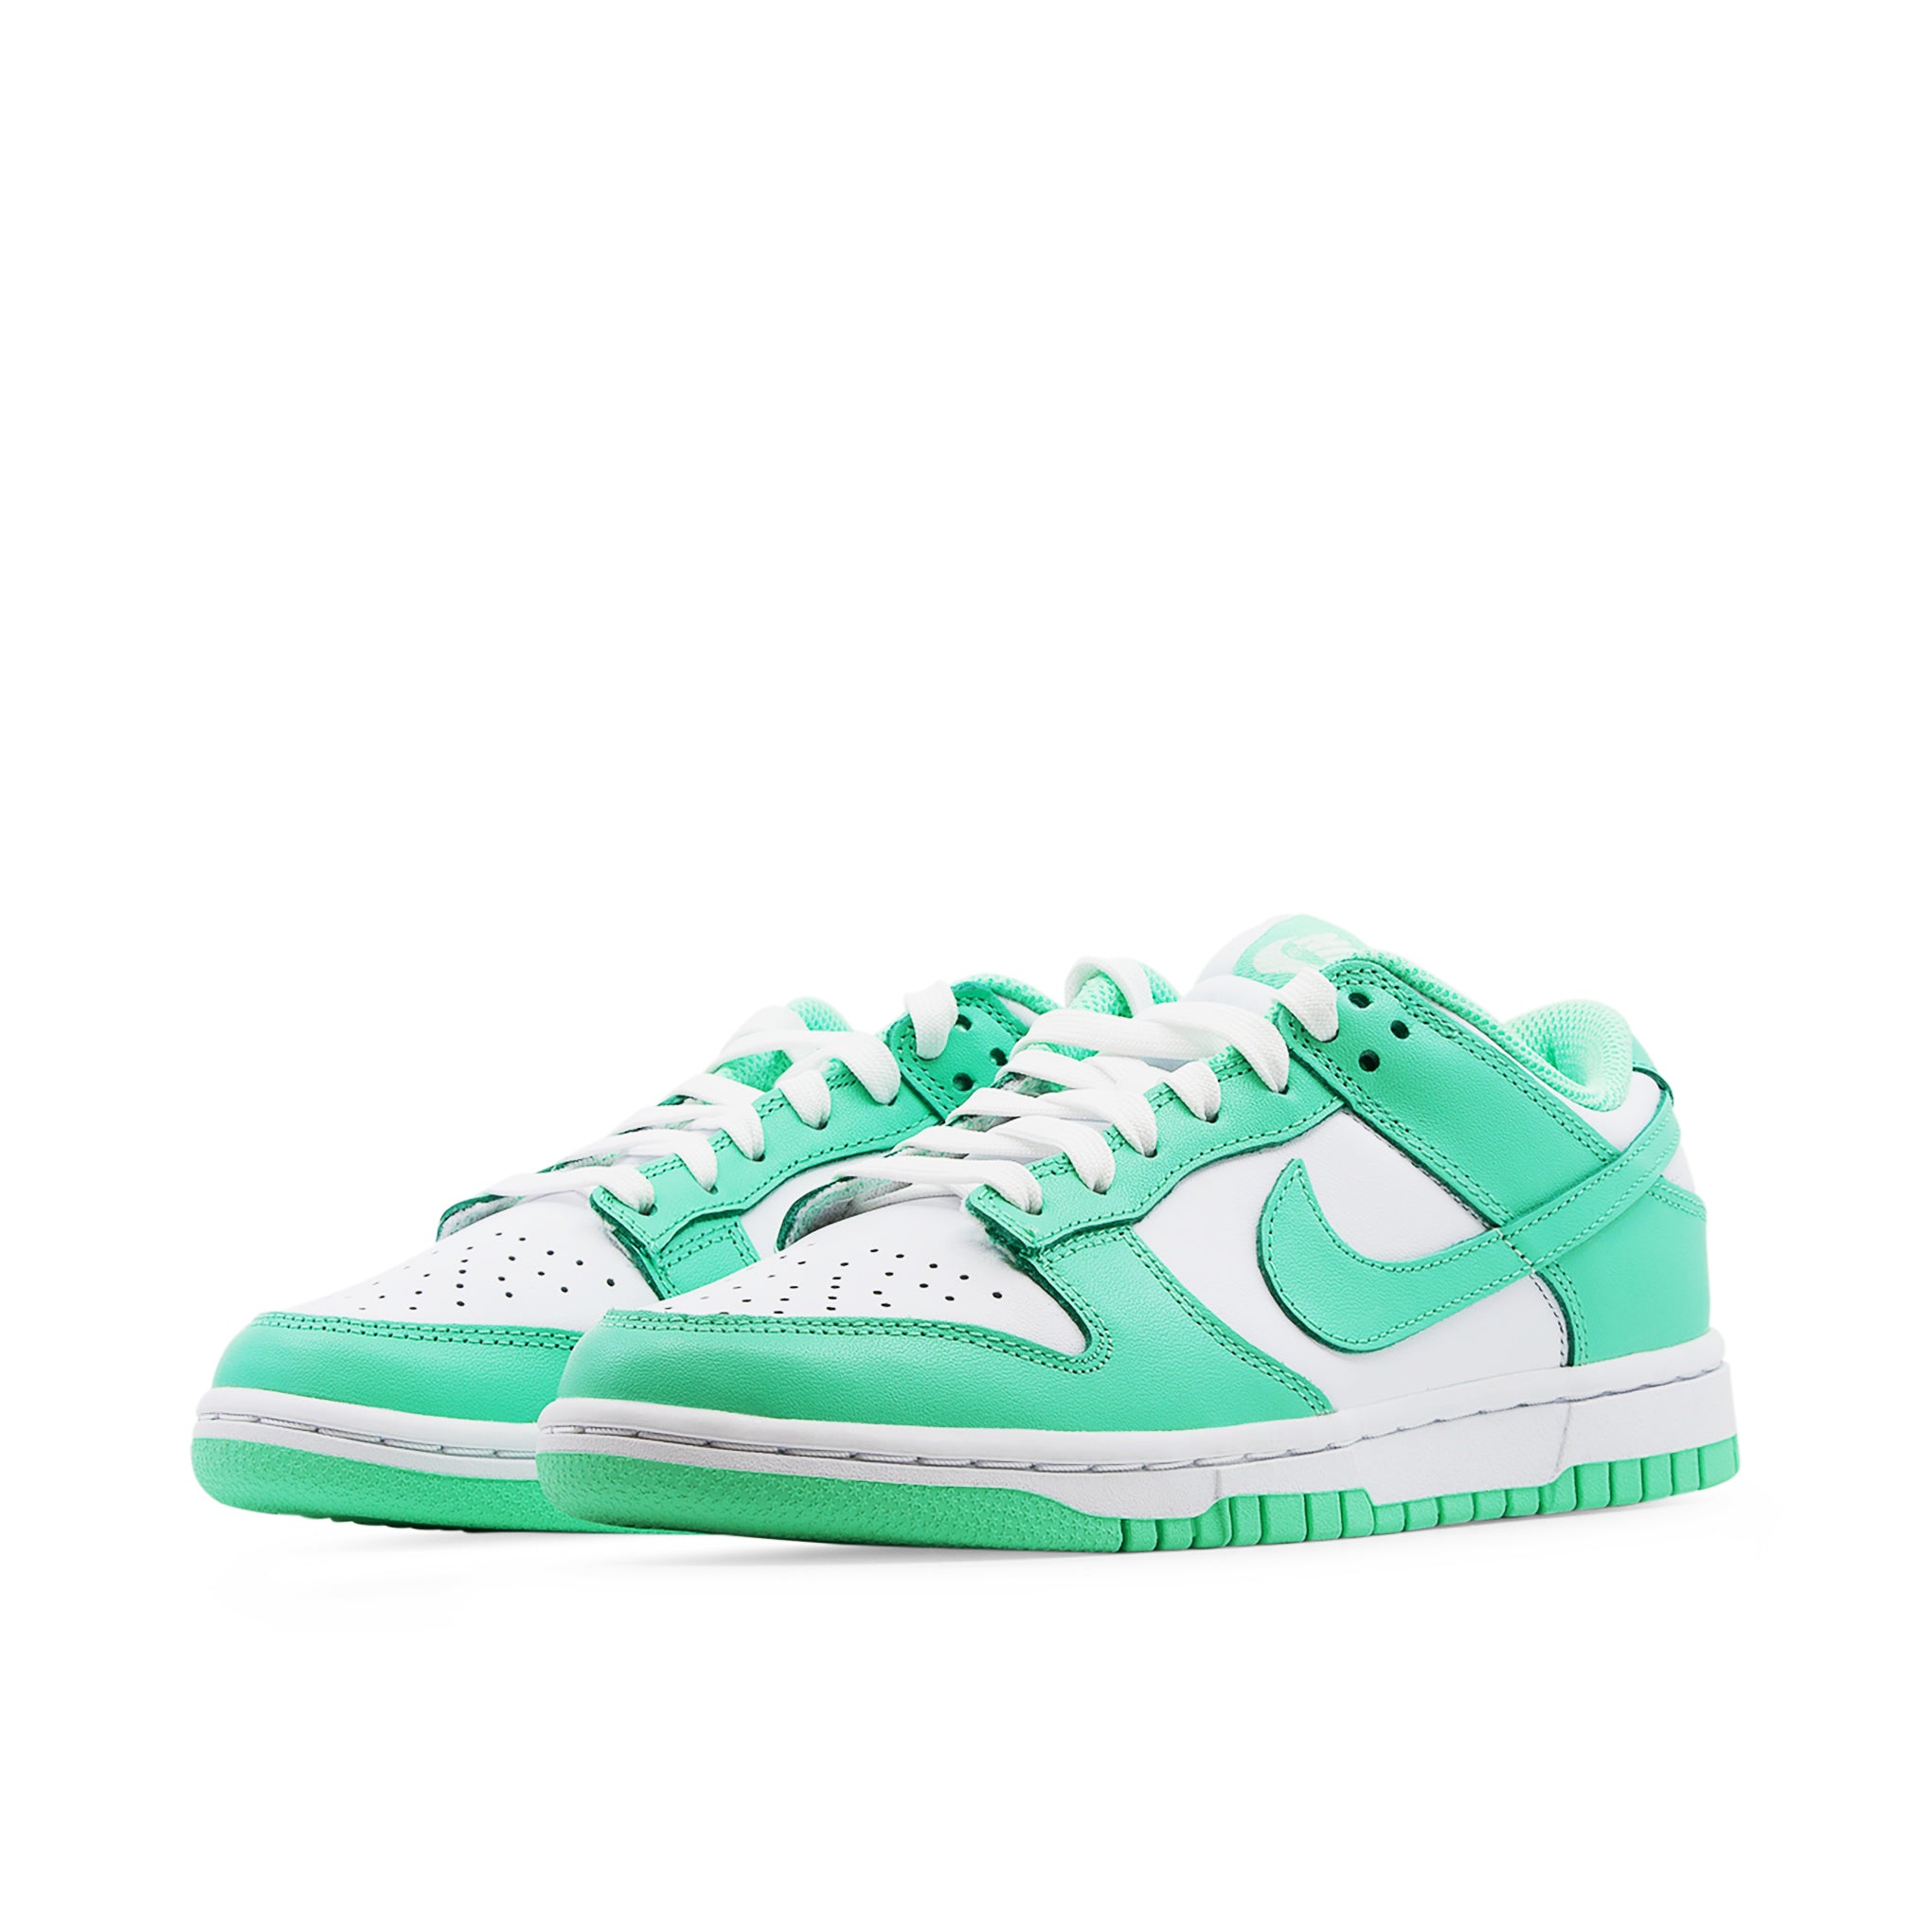 NIKE DUNK LOW MUJER VERDE BRILLO